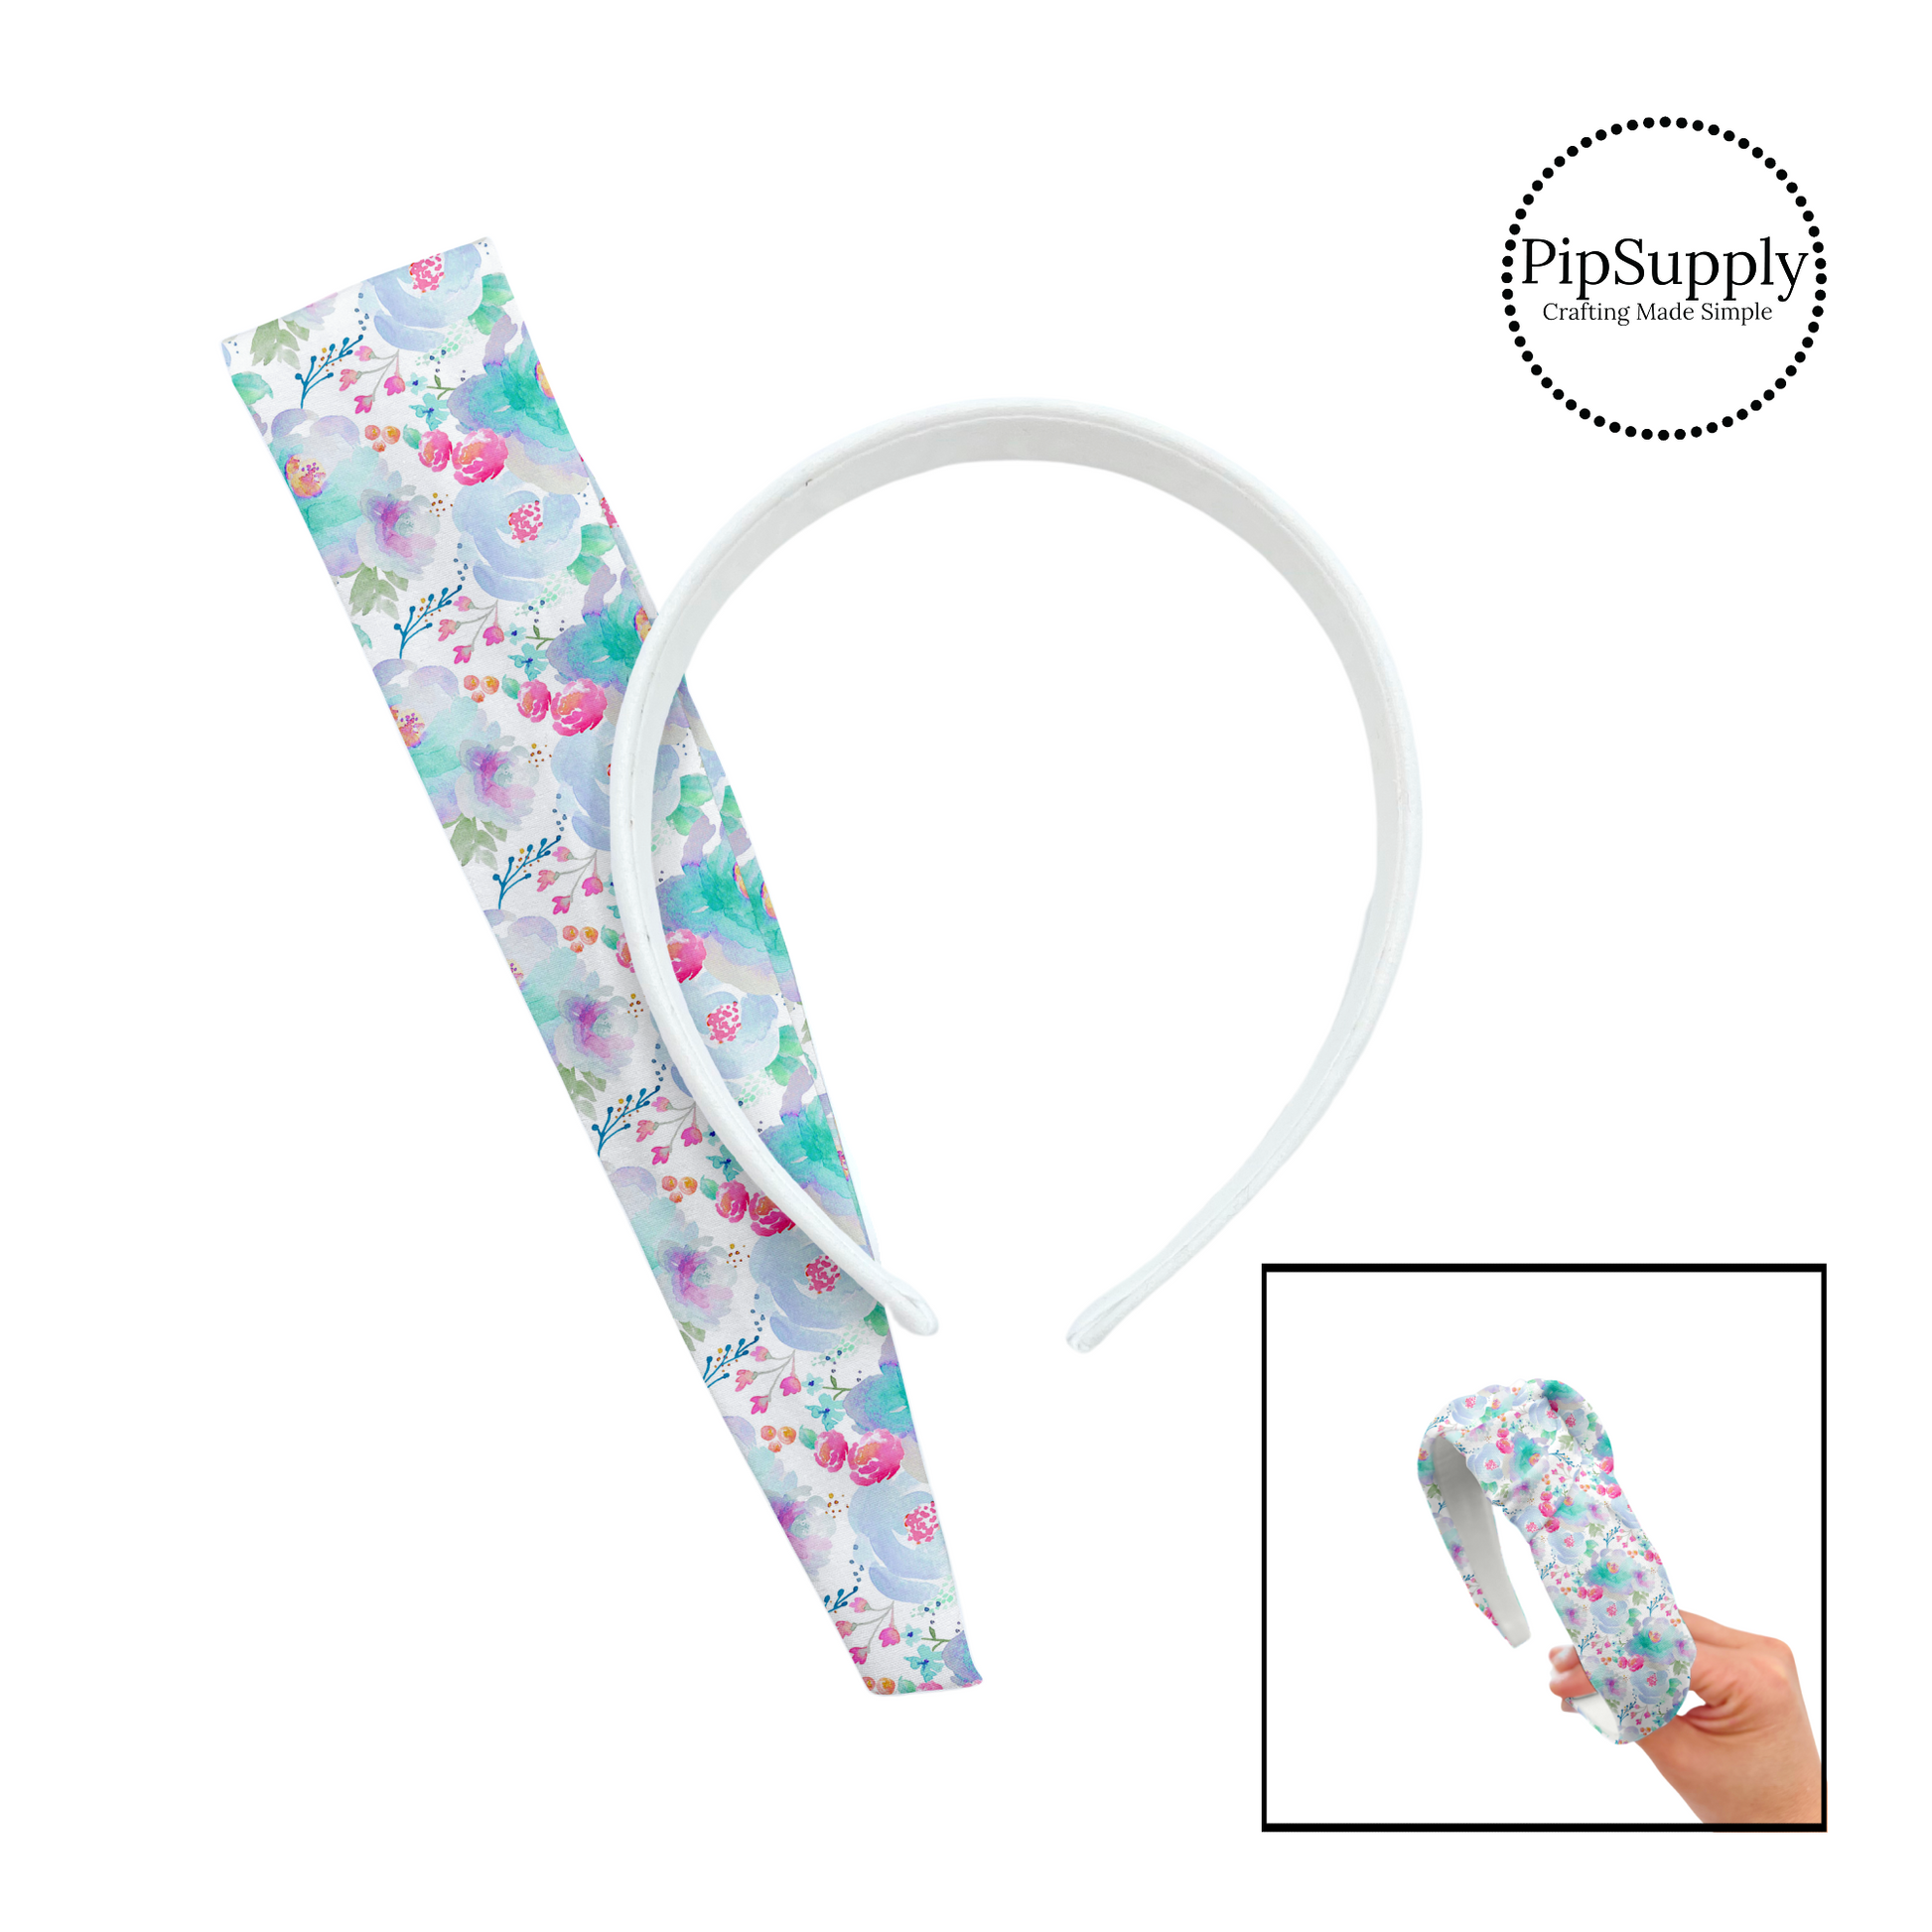 hese fun spring and summer floral kits with beautiful leaves and flowers in the color of  light pink, peach, hot pink, orange, green, purple, and lavender include a custom printed and sewn fabric strip and a coordinating velvet headband.  